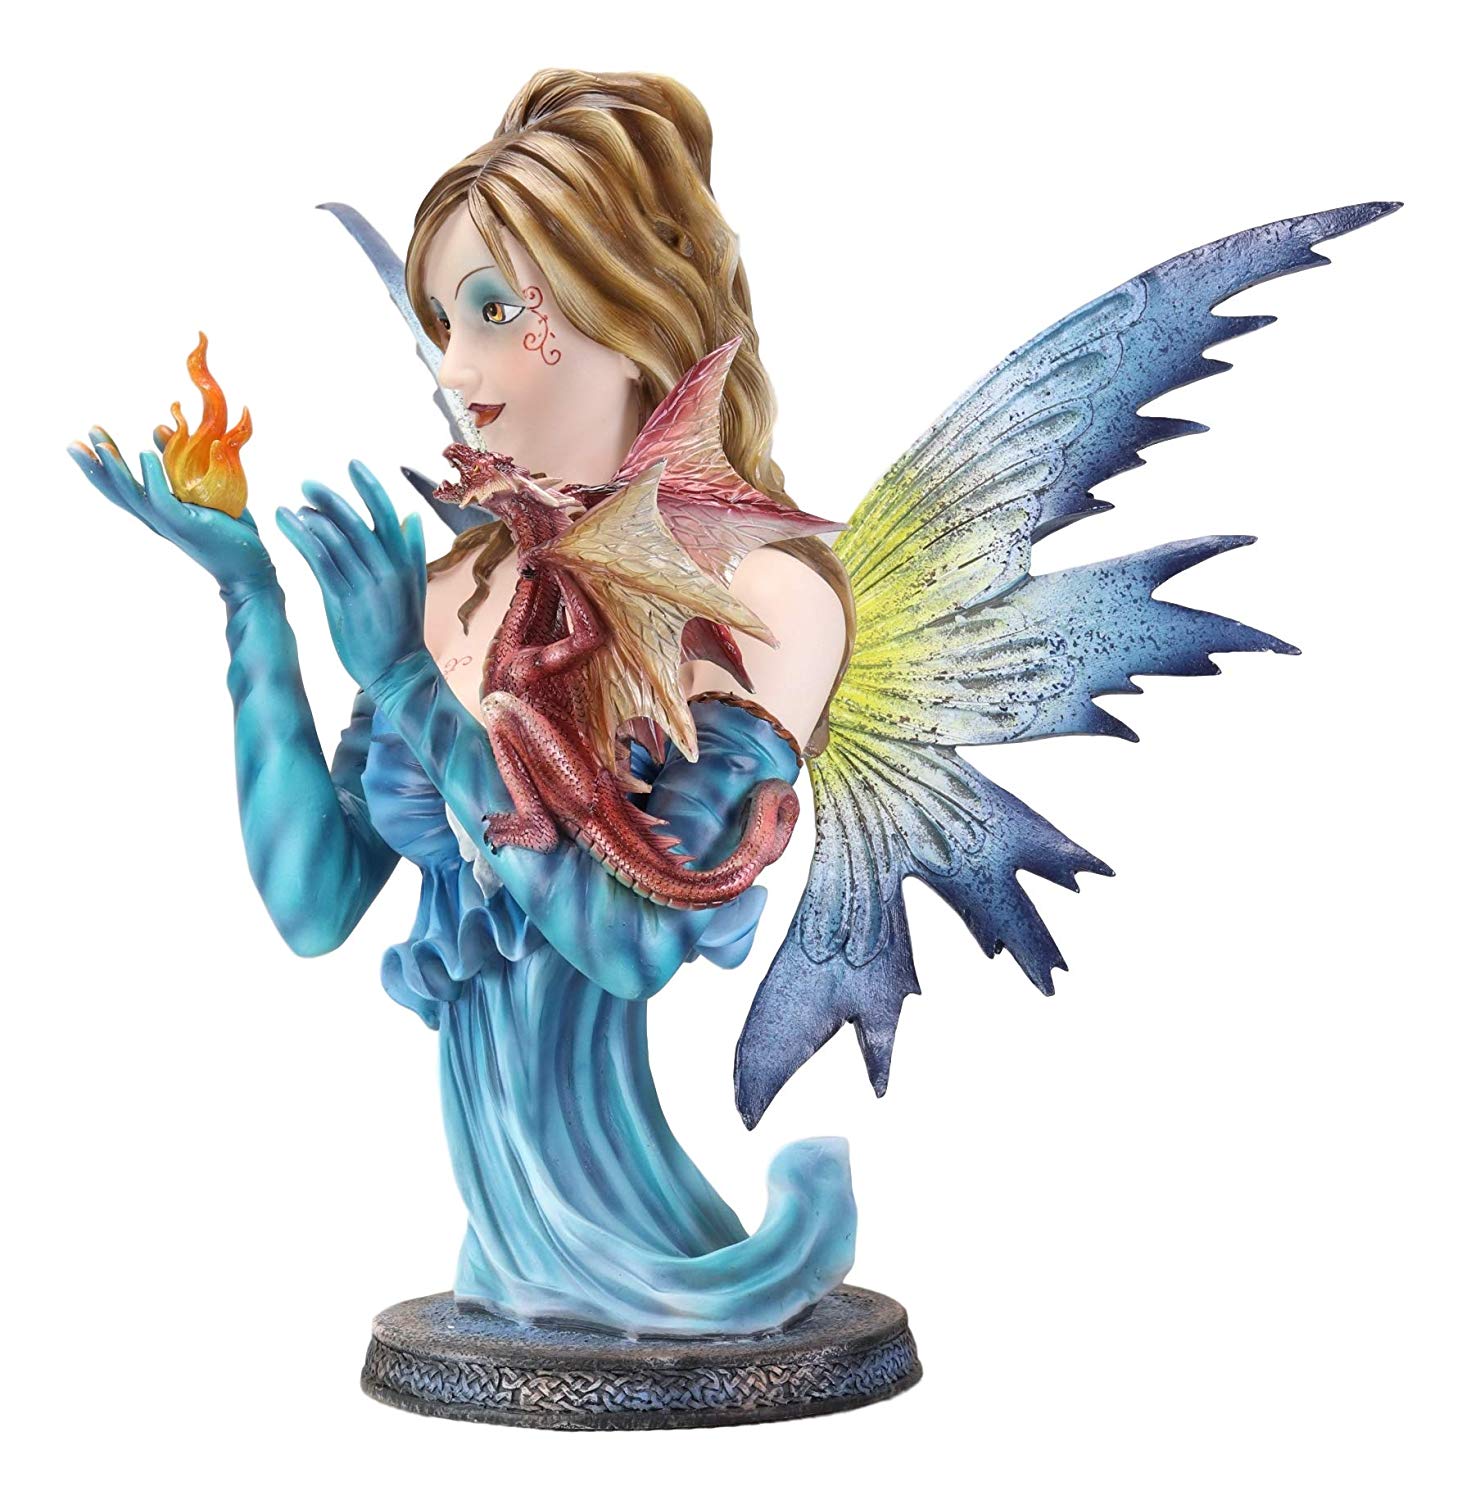 Large 14"H Fantasy Ice Elemental Fairy Controlling Ember With Red Dragon Statue - image 3 of 4